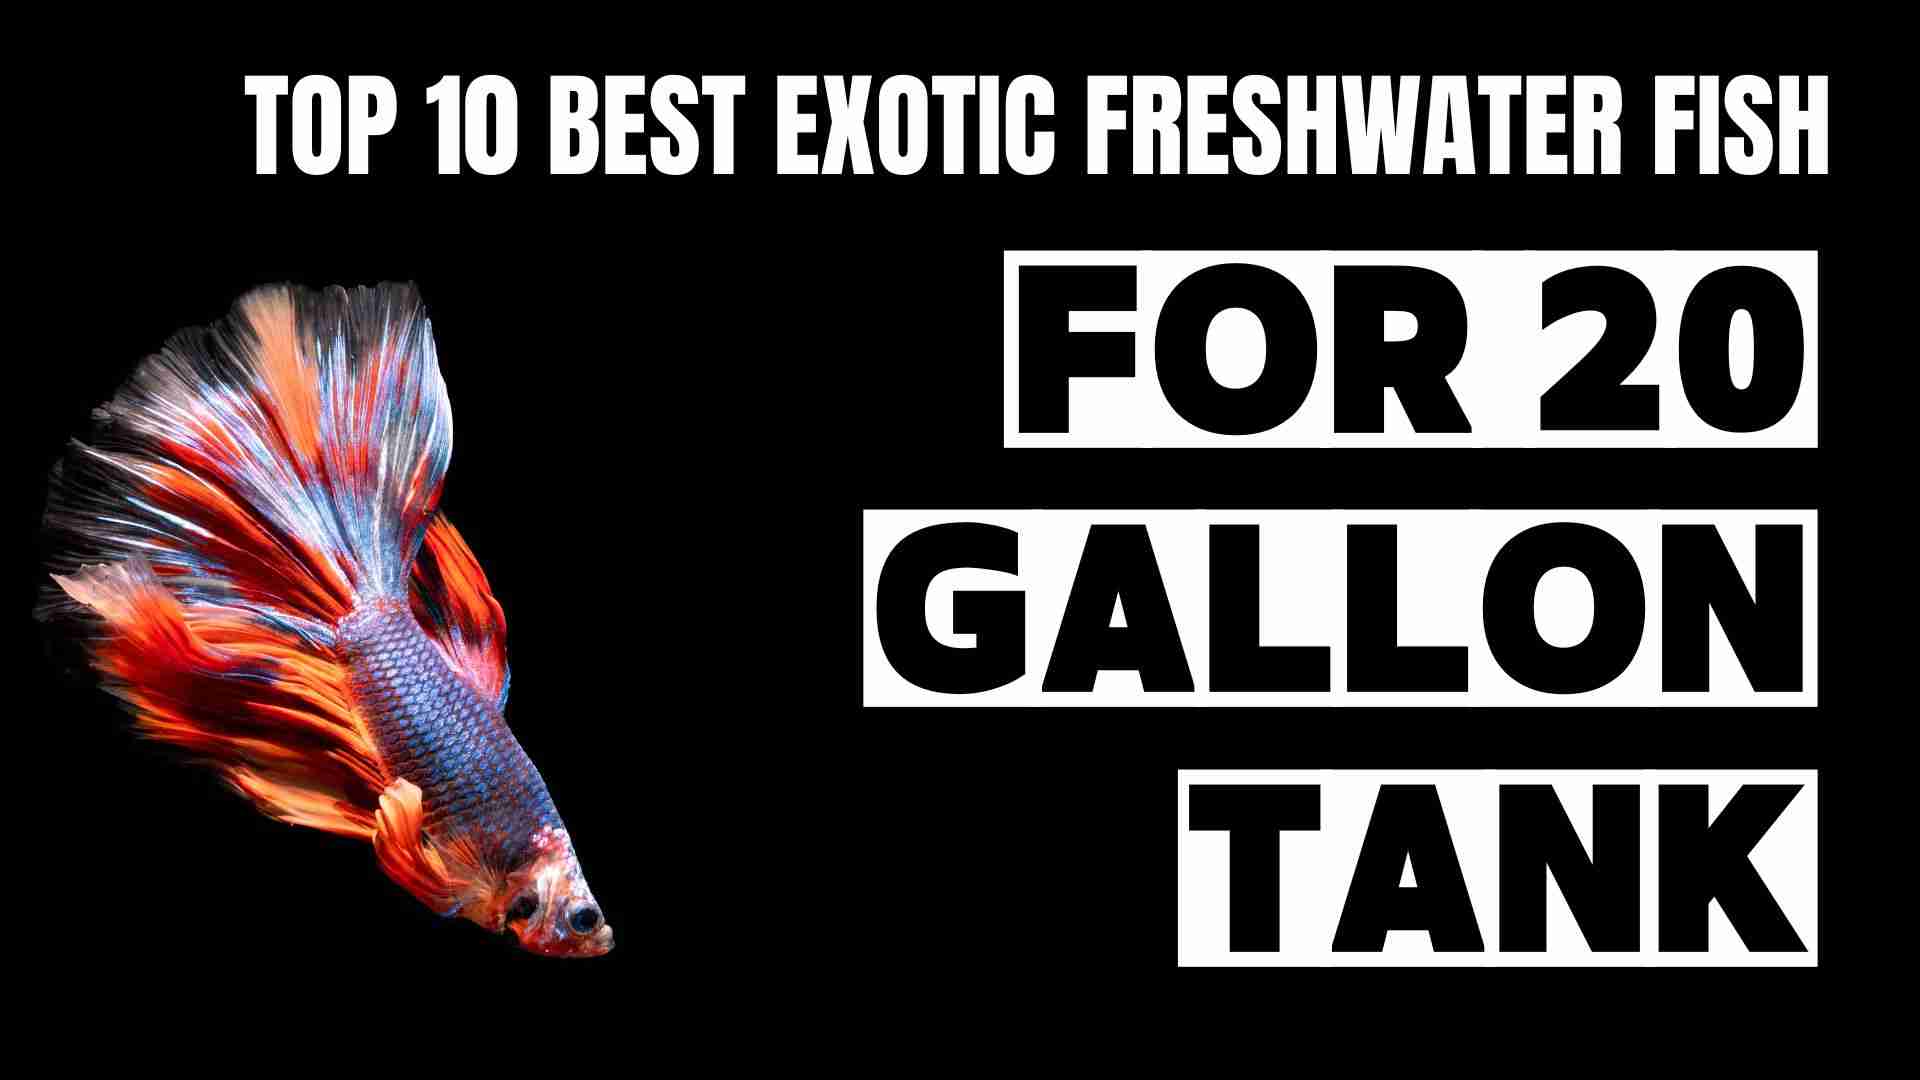 Top 10 Best Exotic Freshwater Fish